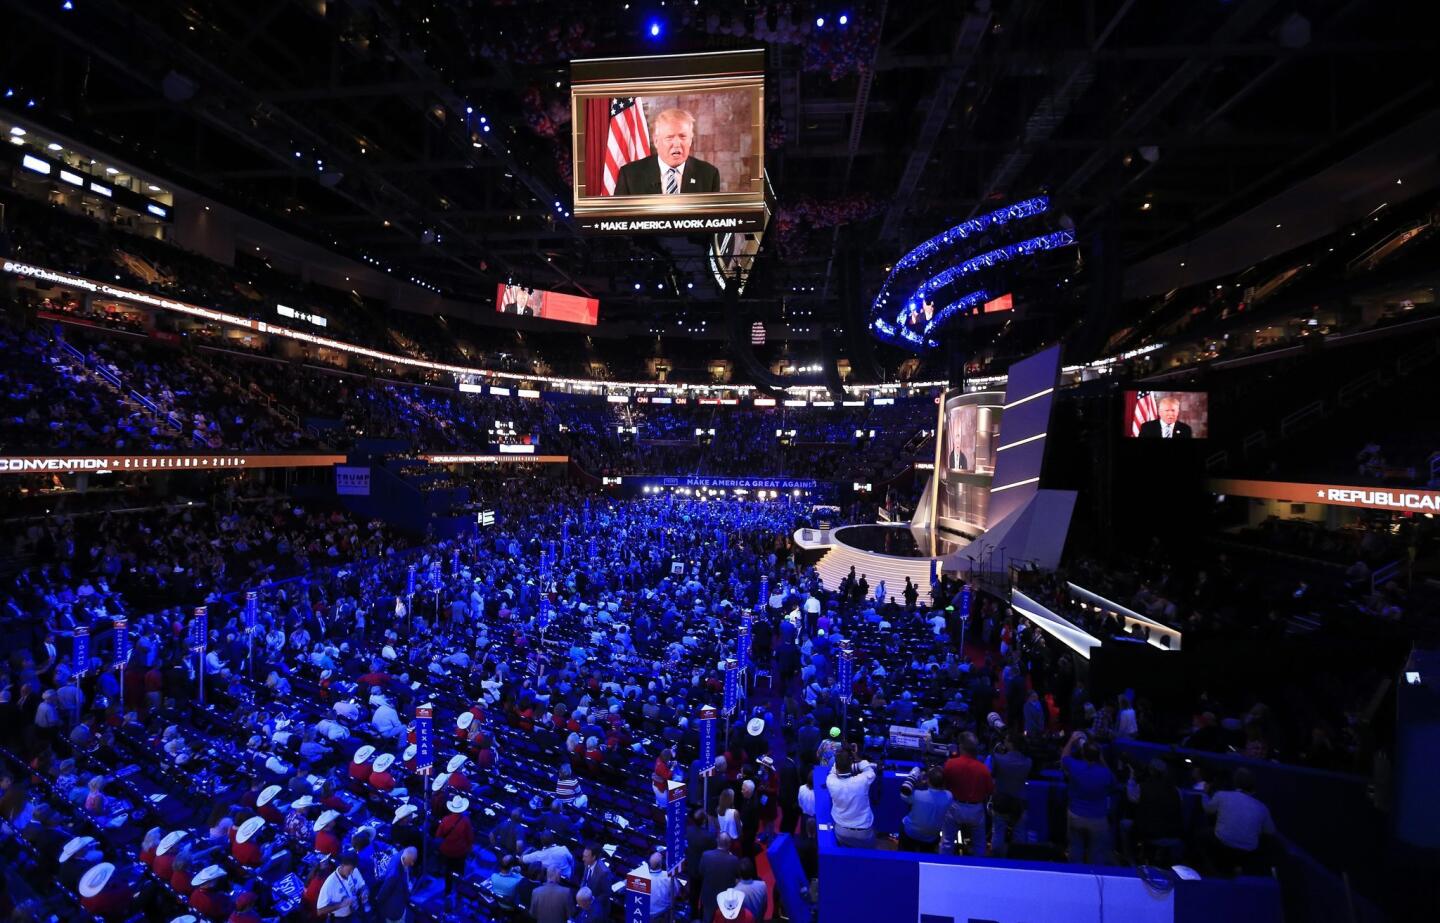 Republican National Convention in Cleveland